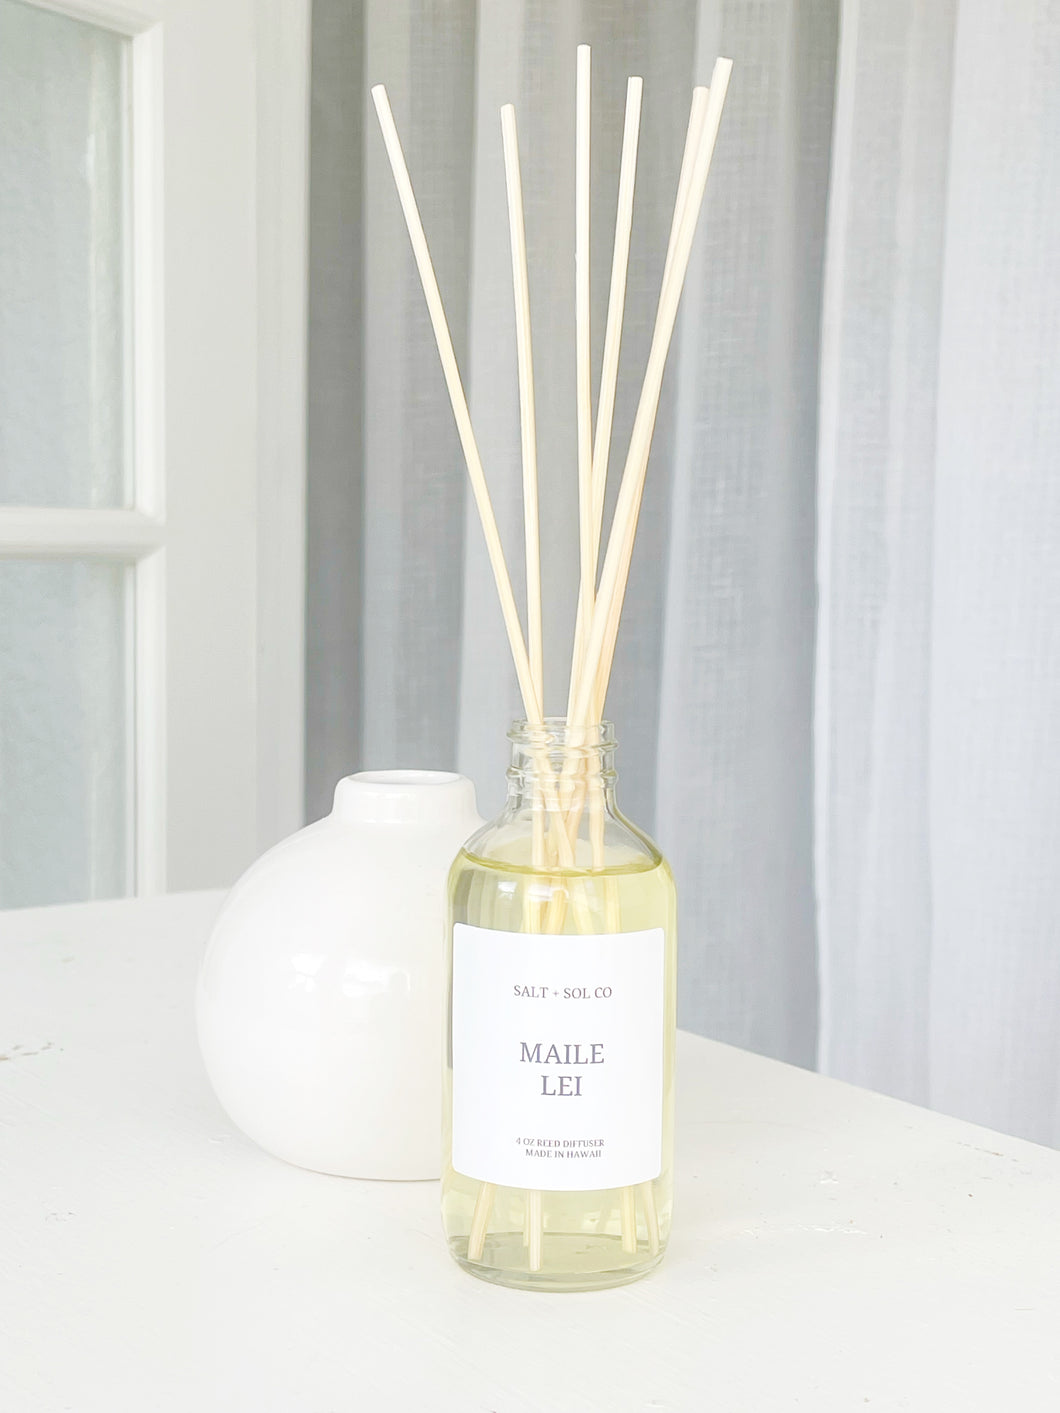 Maile lei scented reed diffuser for sale at salt + SOL co made in Hawaii 